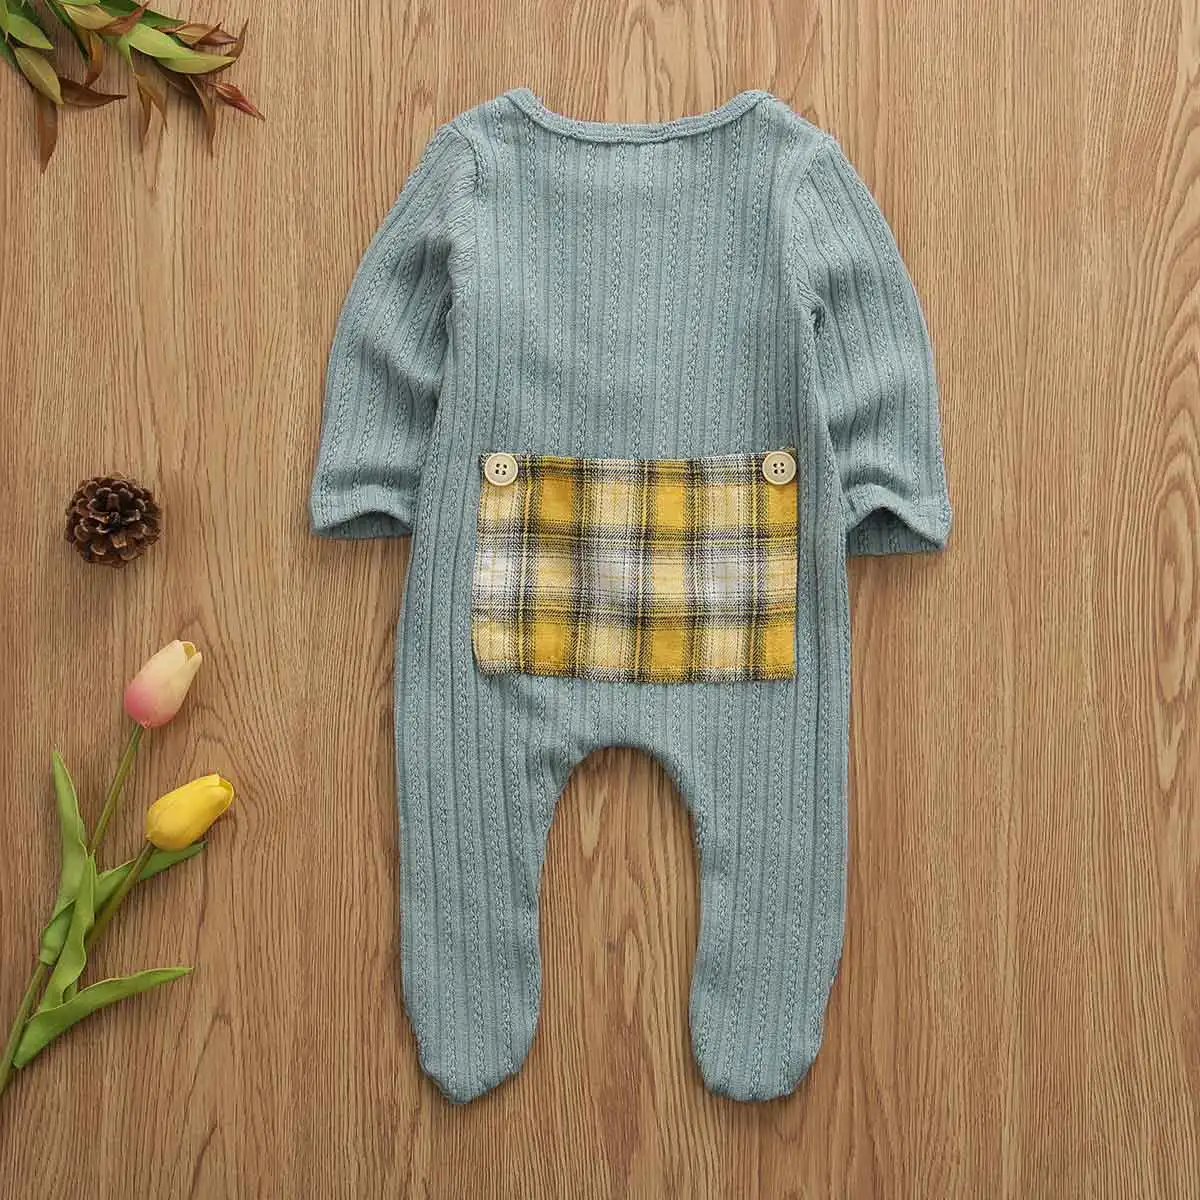 Infant Baby Knitted Footies for Boys Girls Kid Newborn Cotton Clothes Long Sleeve Jumpsuit Toddler Autumn Winter Outfit 0-9M - Цвет: Синий